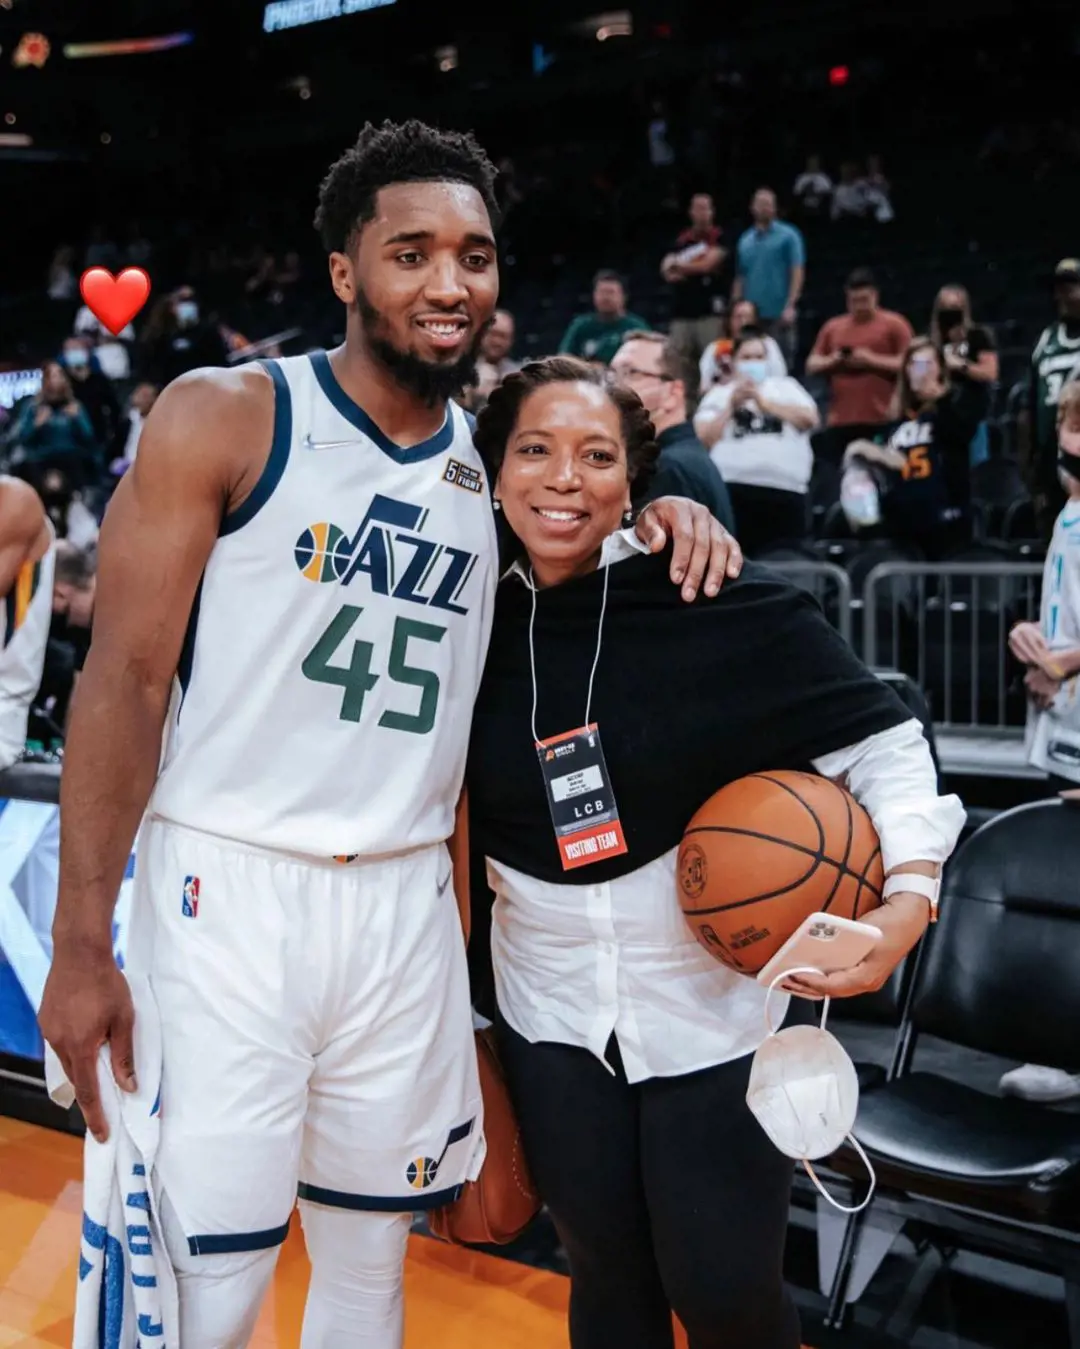 Nicole posed with her son, Donovan after a basketball match between Utah Jazz and Valley in February 2022